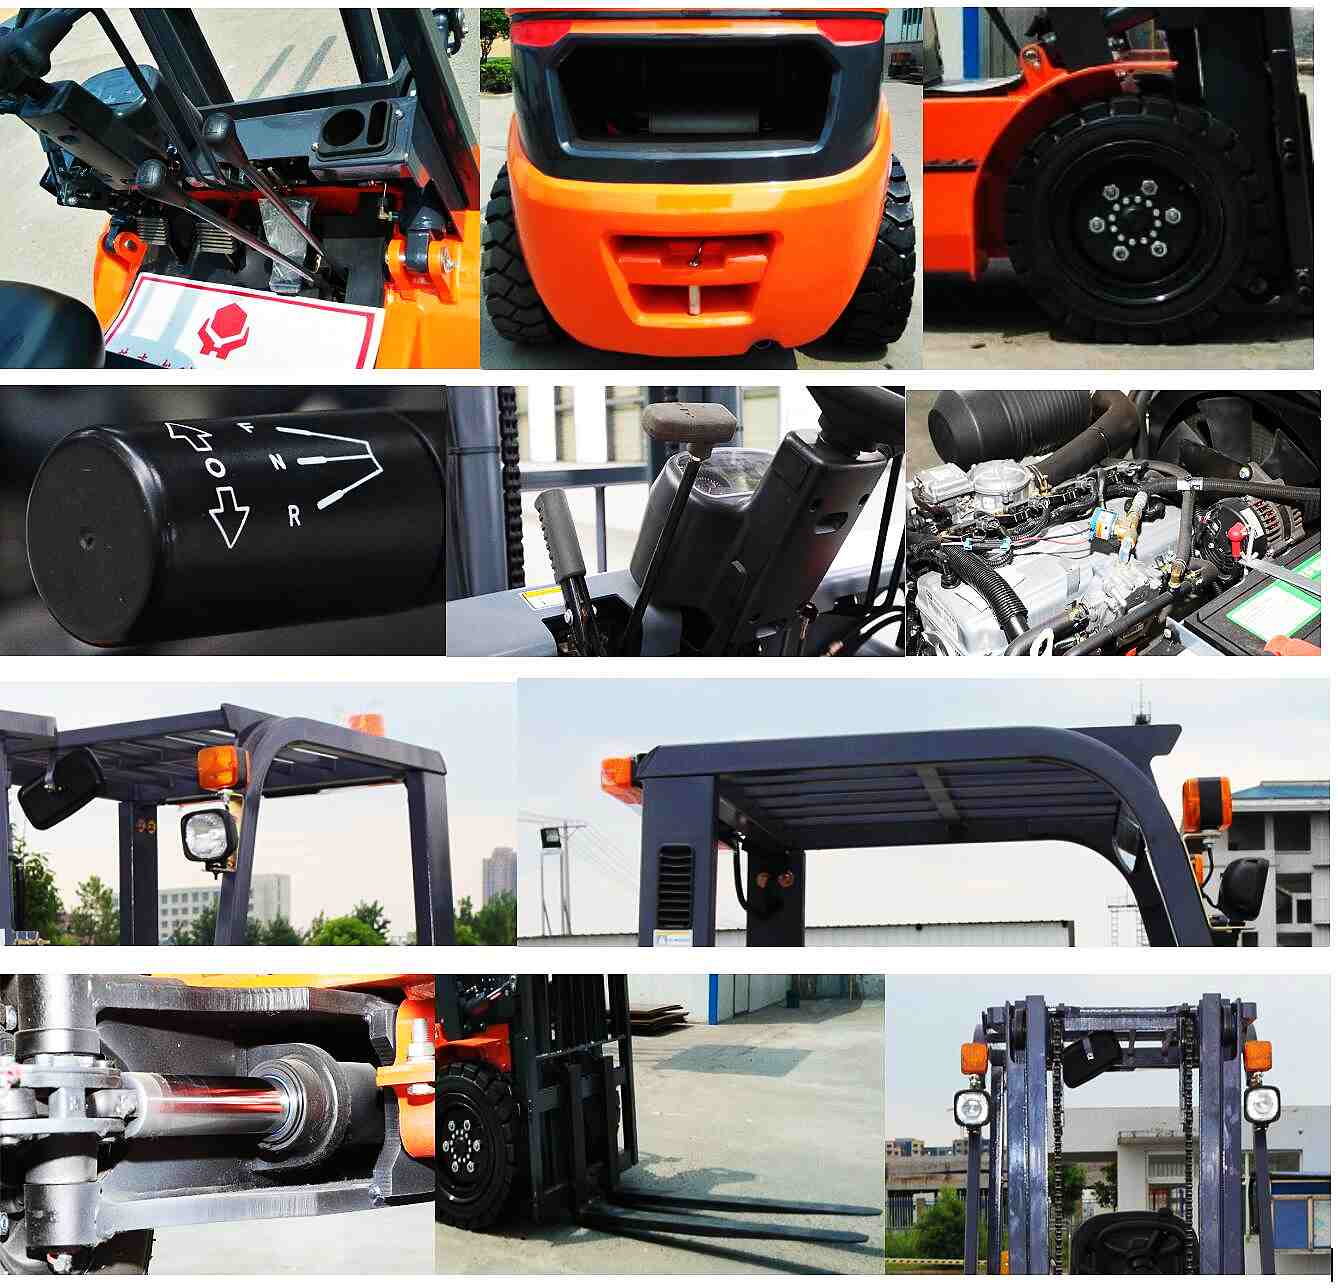 Details of 1.5-5Ton Diesel Counterbalance Forklift Truck